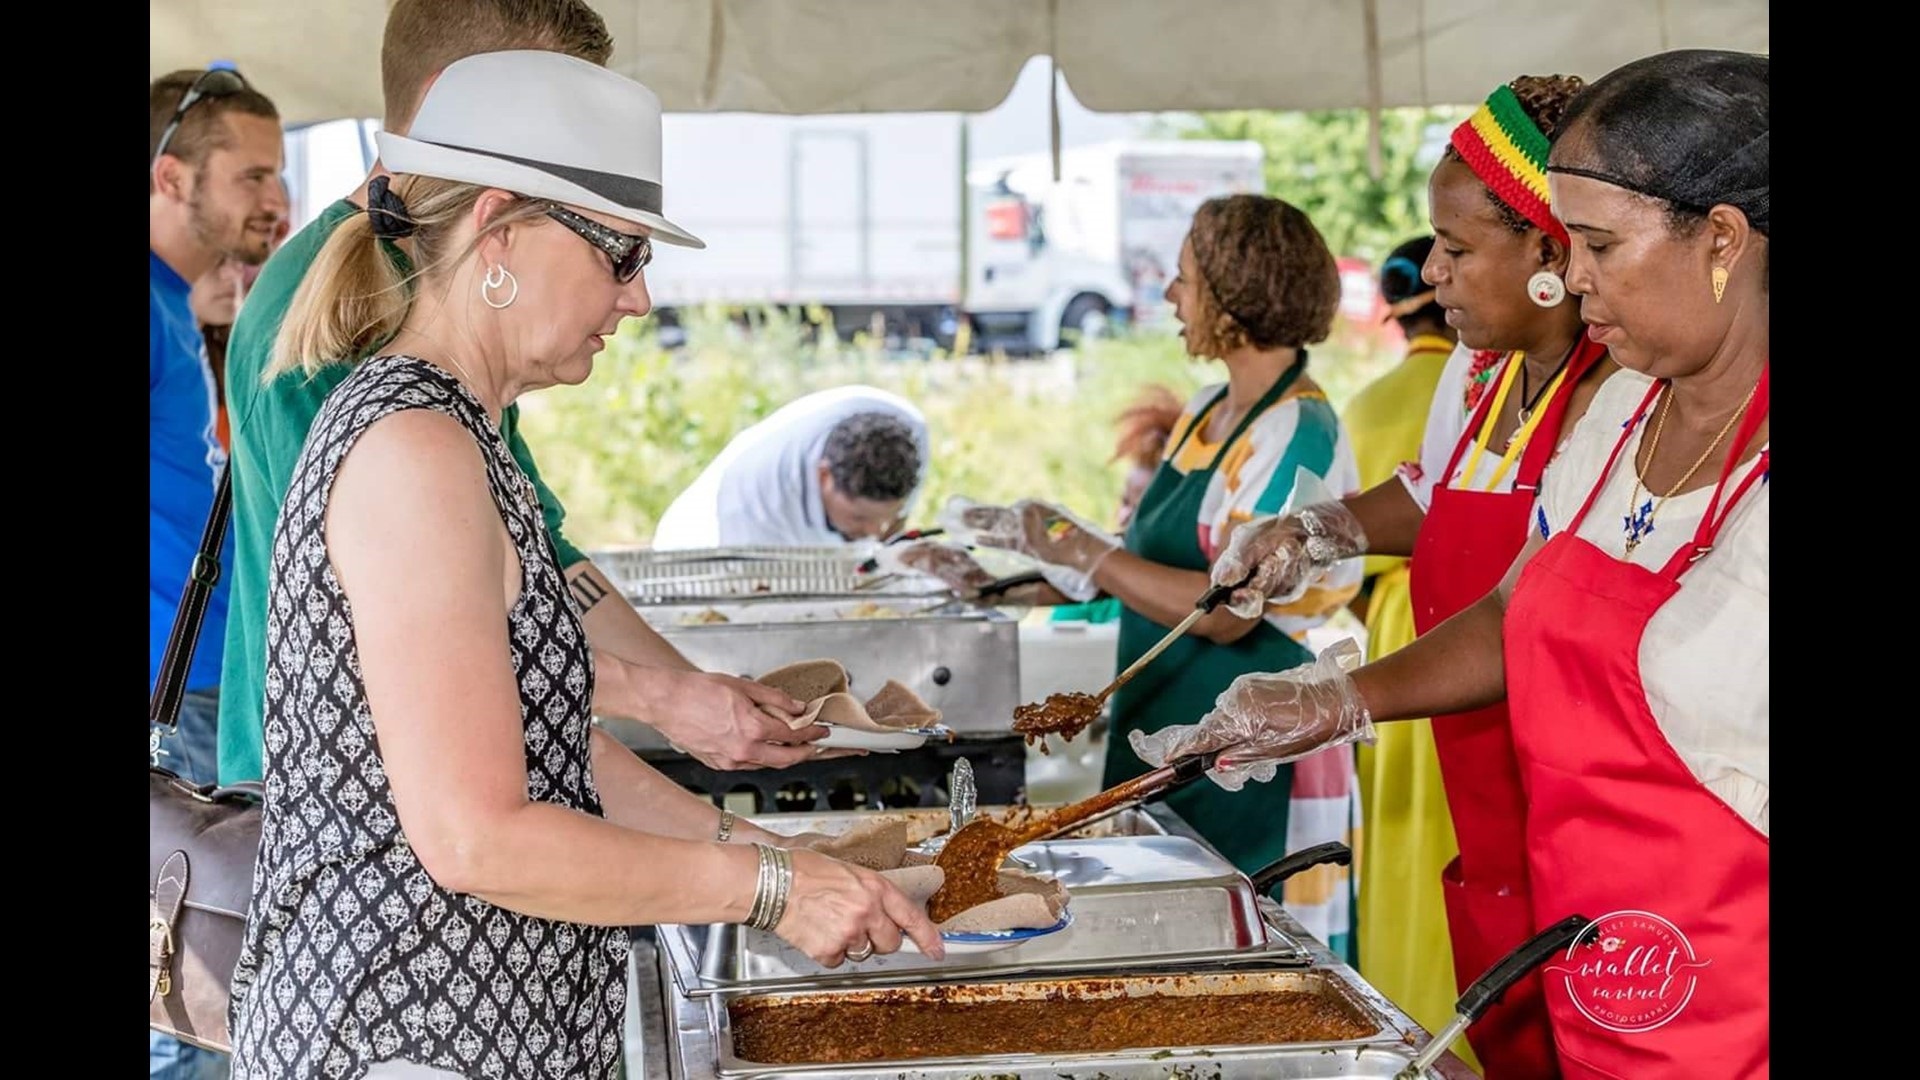 Misir Wat, a lentil dish, is being served on injera, an Ethiopian sourdough bread at a Colorado&#039;s Taste of Ethiopia before the food festival paused for three years because of the pandemic.